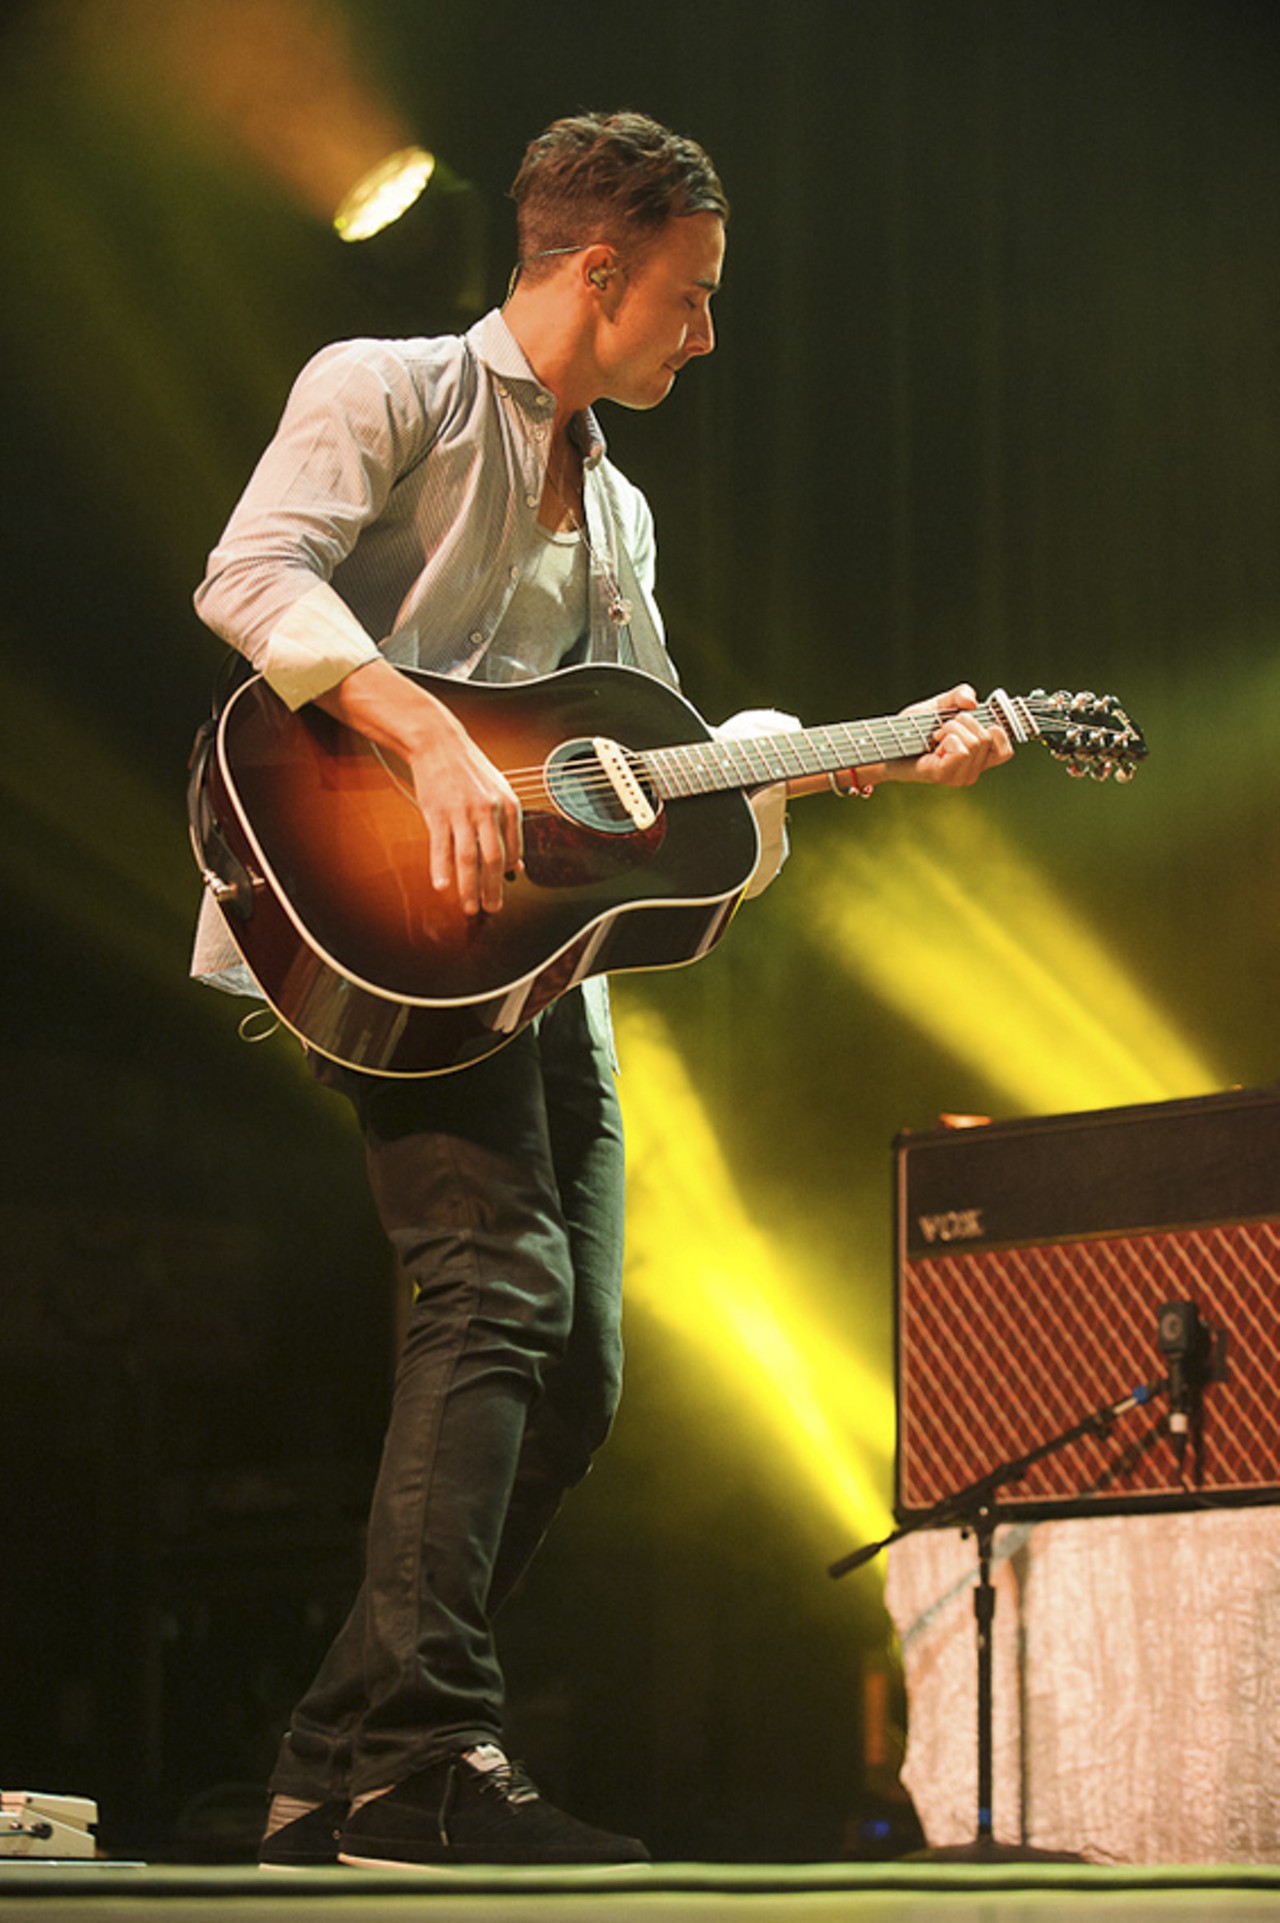 The Fray performing in concert at the Pageant.